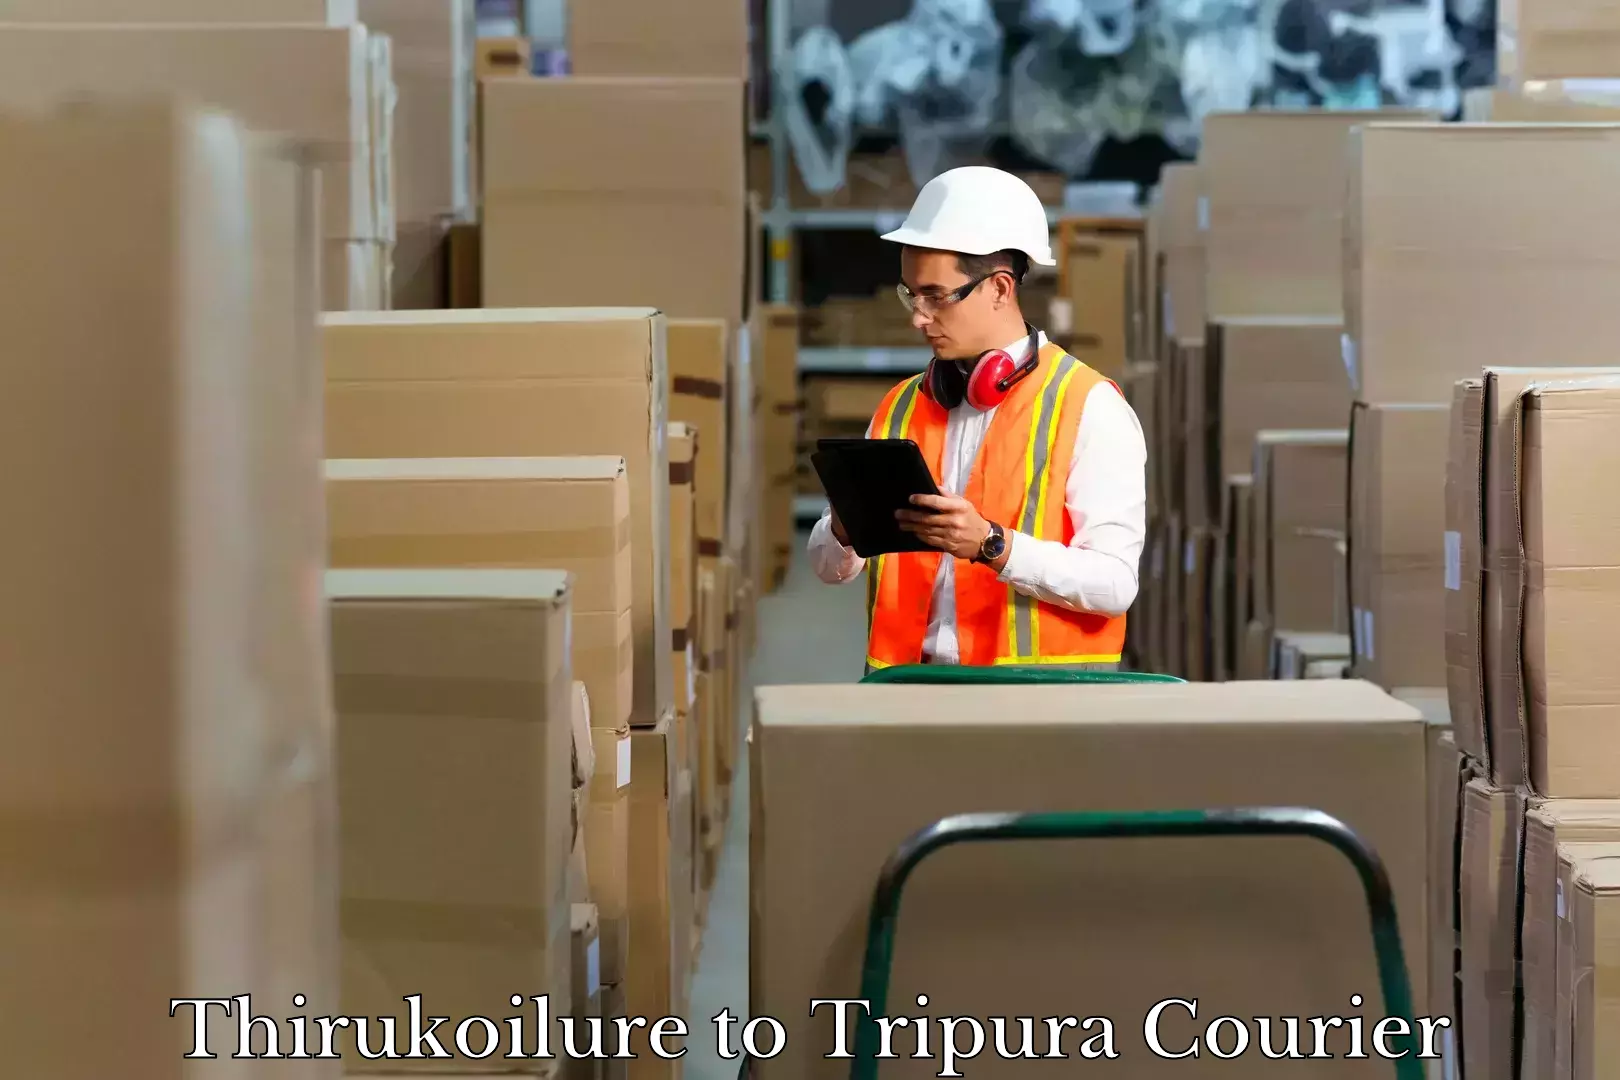 Reliable luggage courier Thirukoilure to Udaipur Tripura